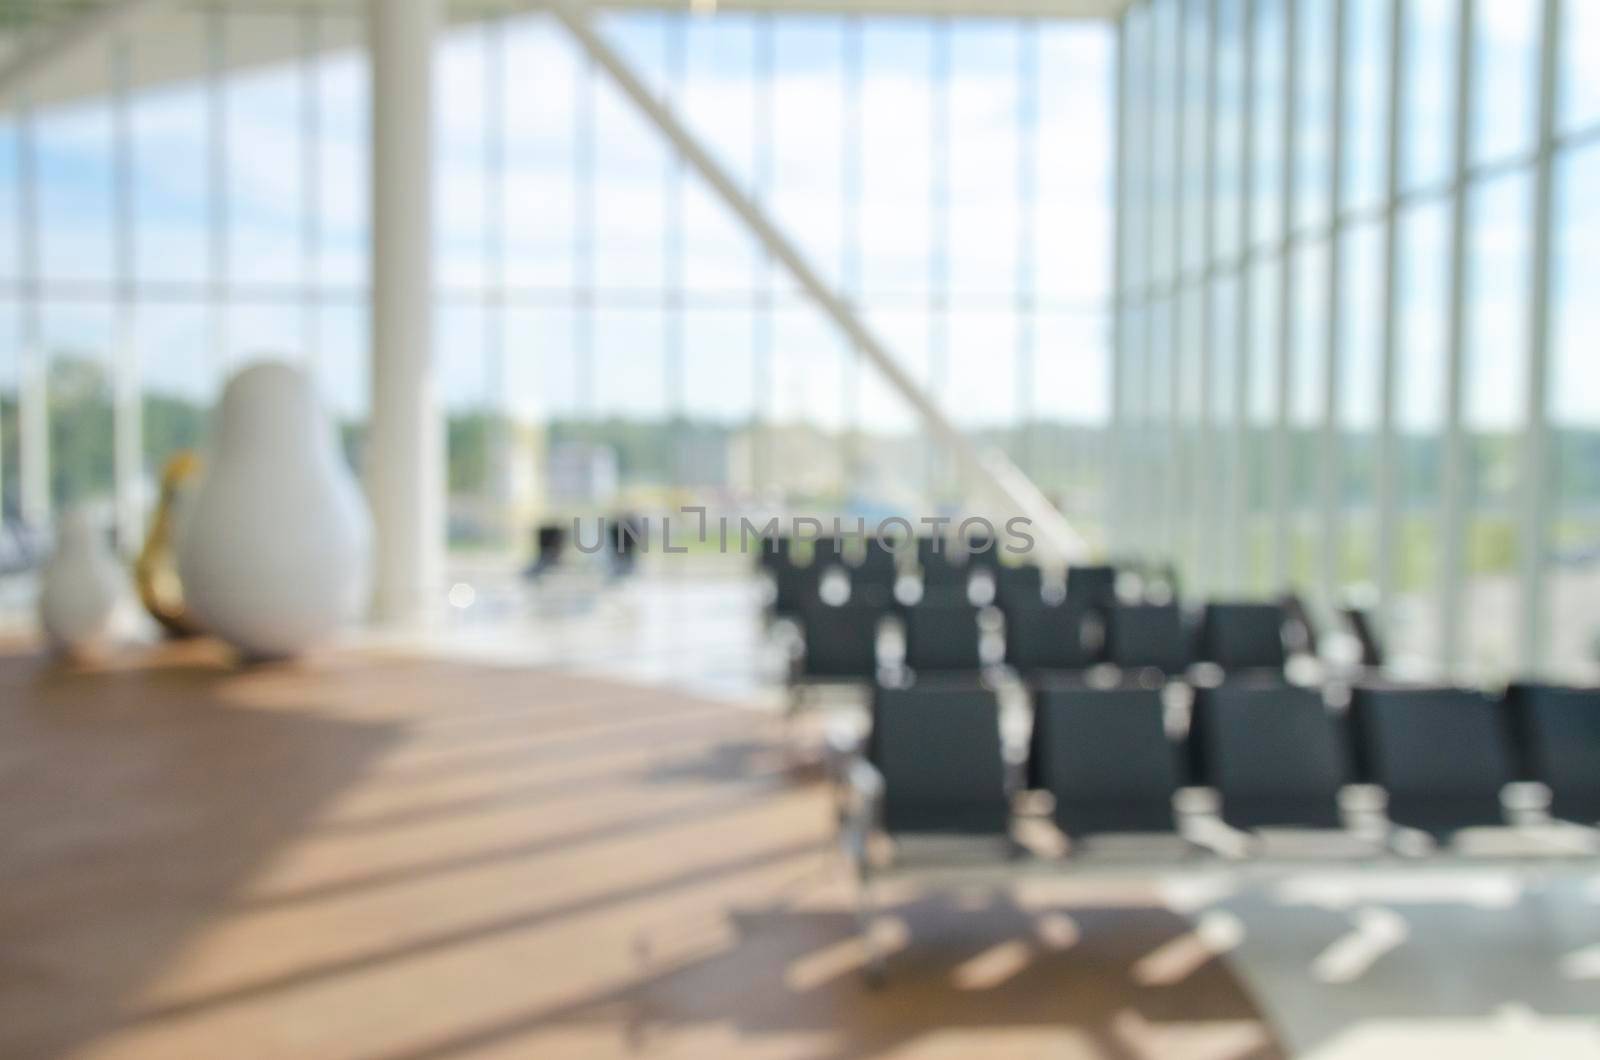 Office building or university library lobby hall reading area blur background with blurry school hallway corridor interior view to empty corridor entrance, glass wall and exterior light illumination